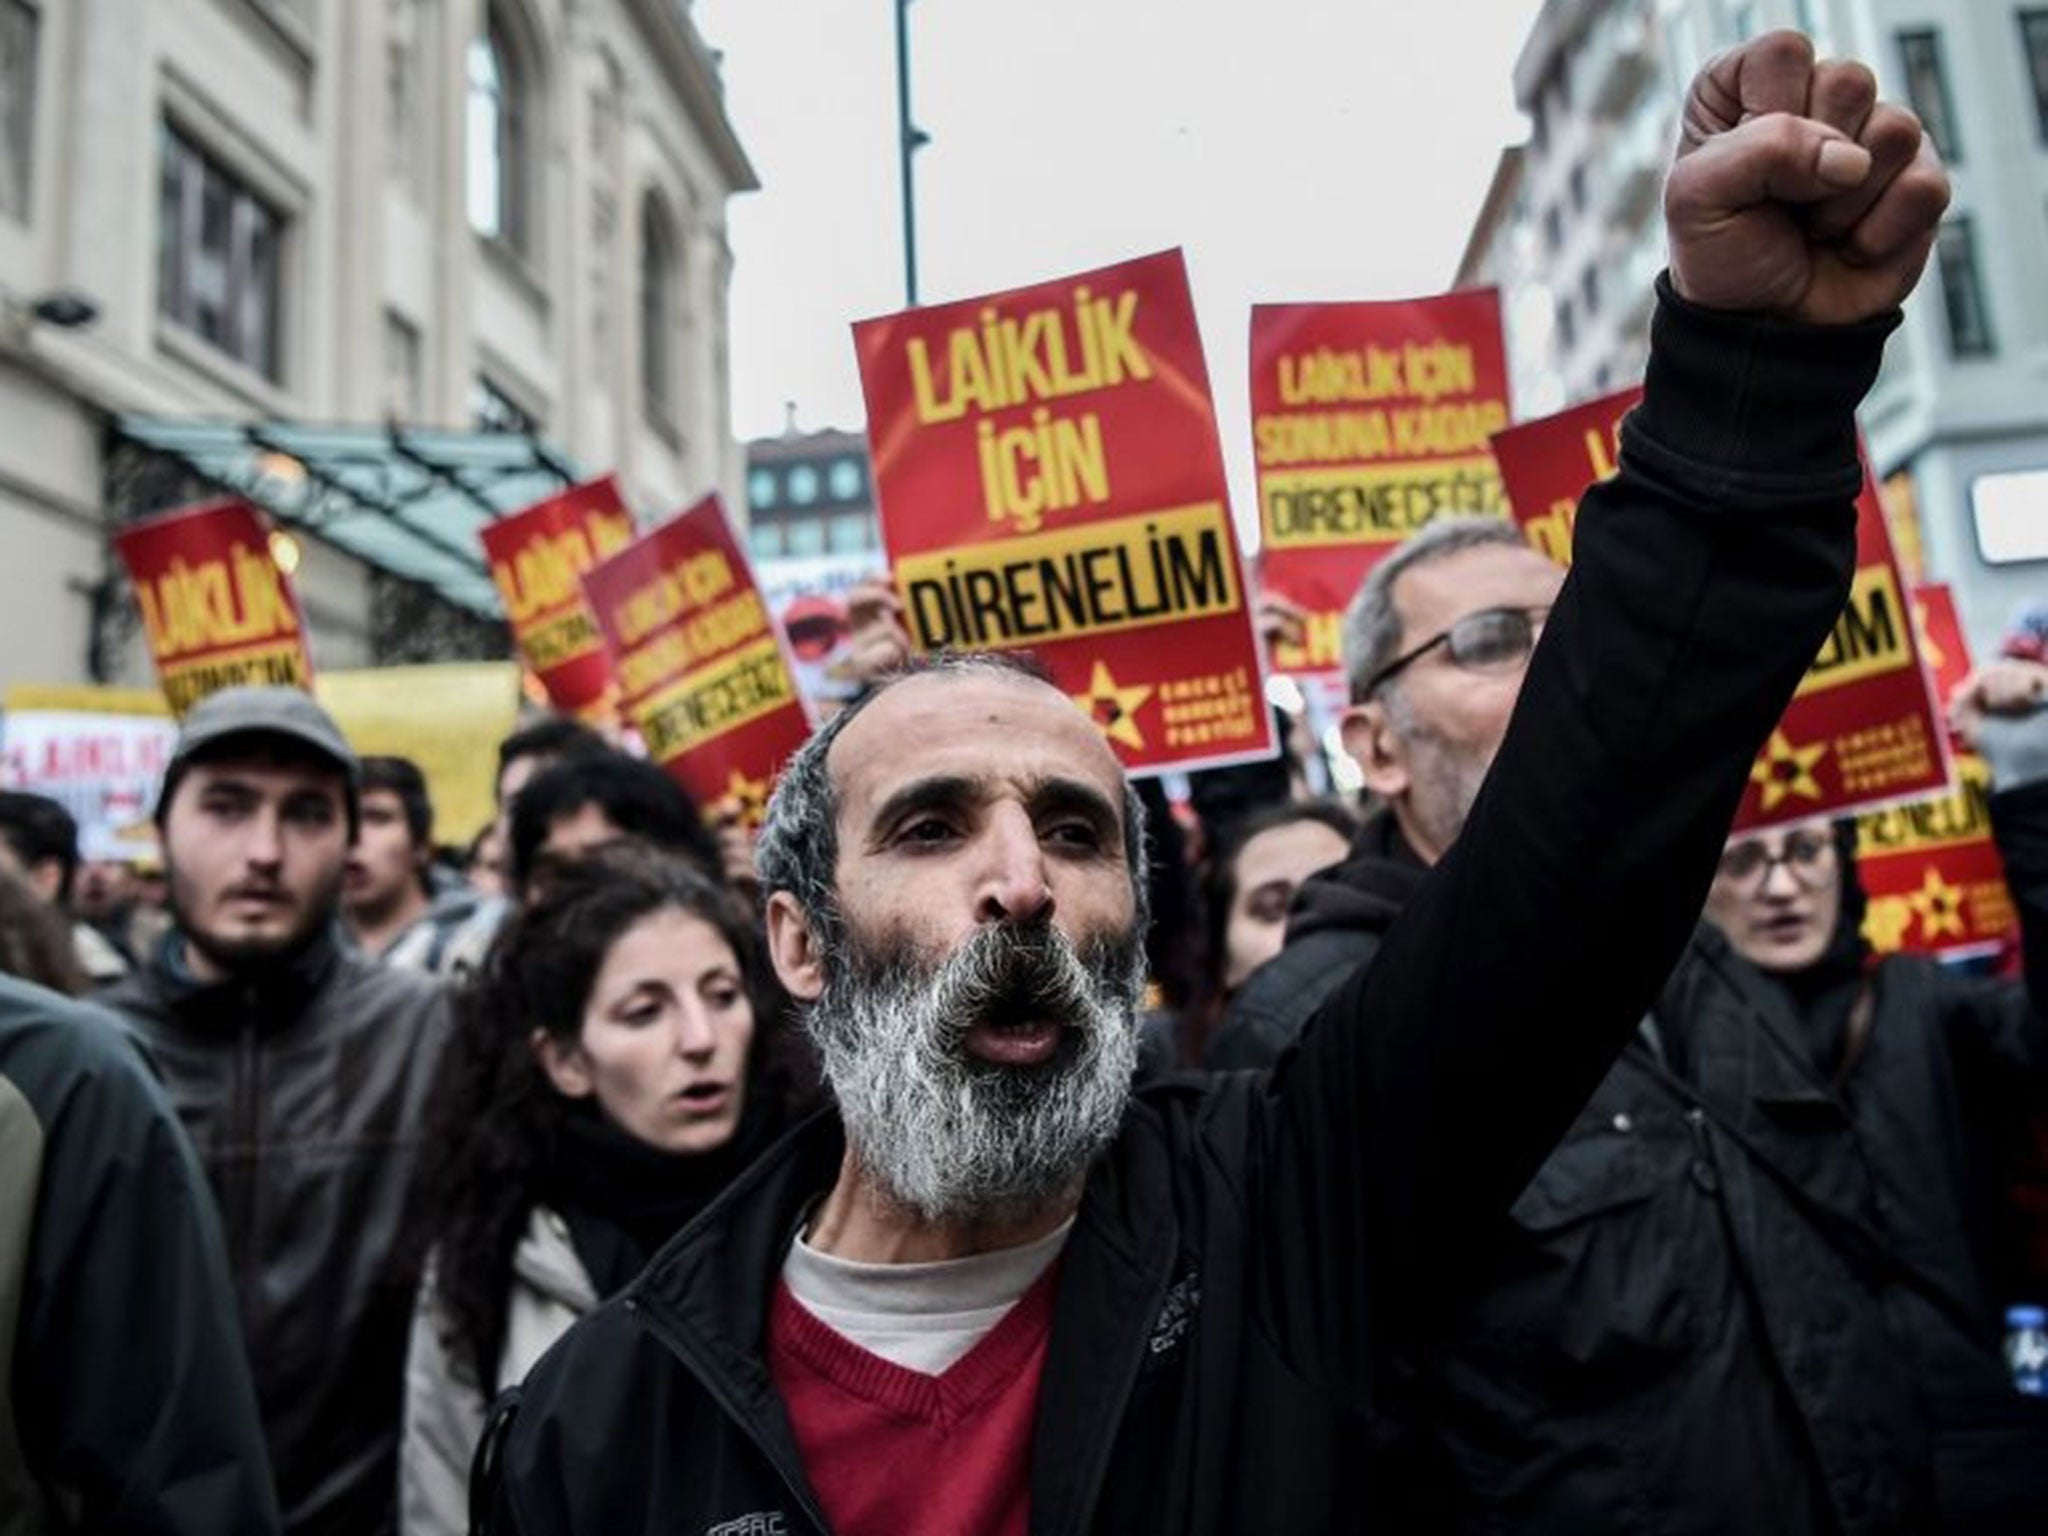 Protesters shout slogans and hold placards reading 'We will resist for secularism' on 26 April, 2016, at Kadikoy district in Istanbul, during a protest against a call for the country to adopt a religious constitution